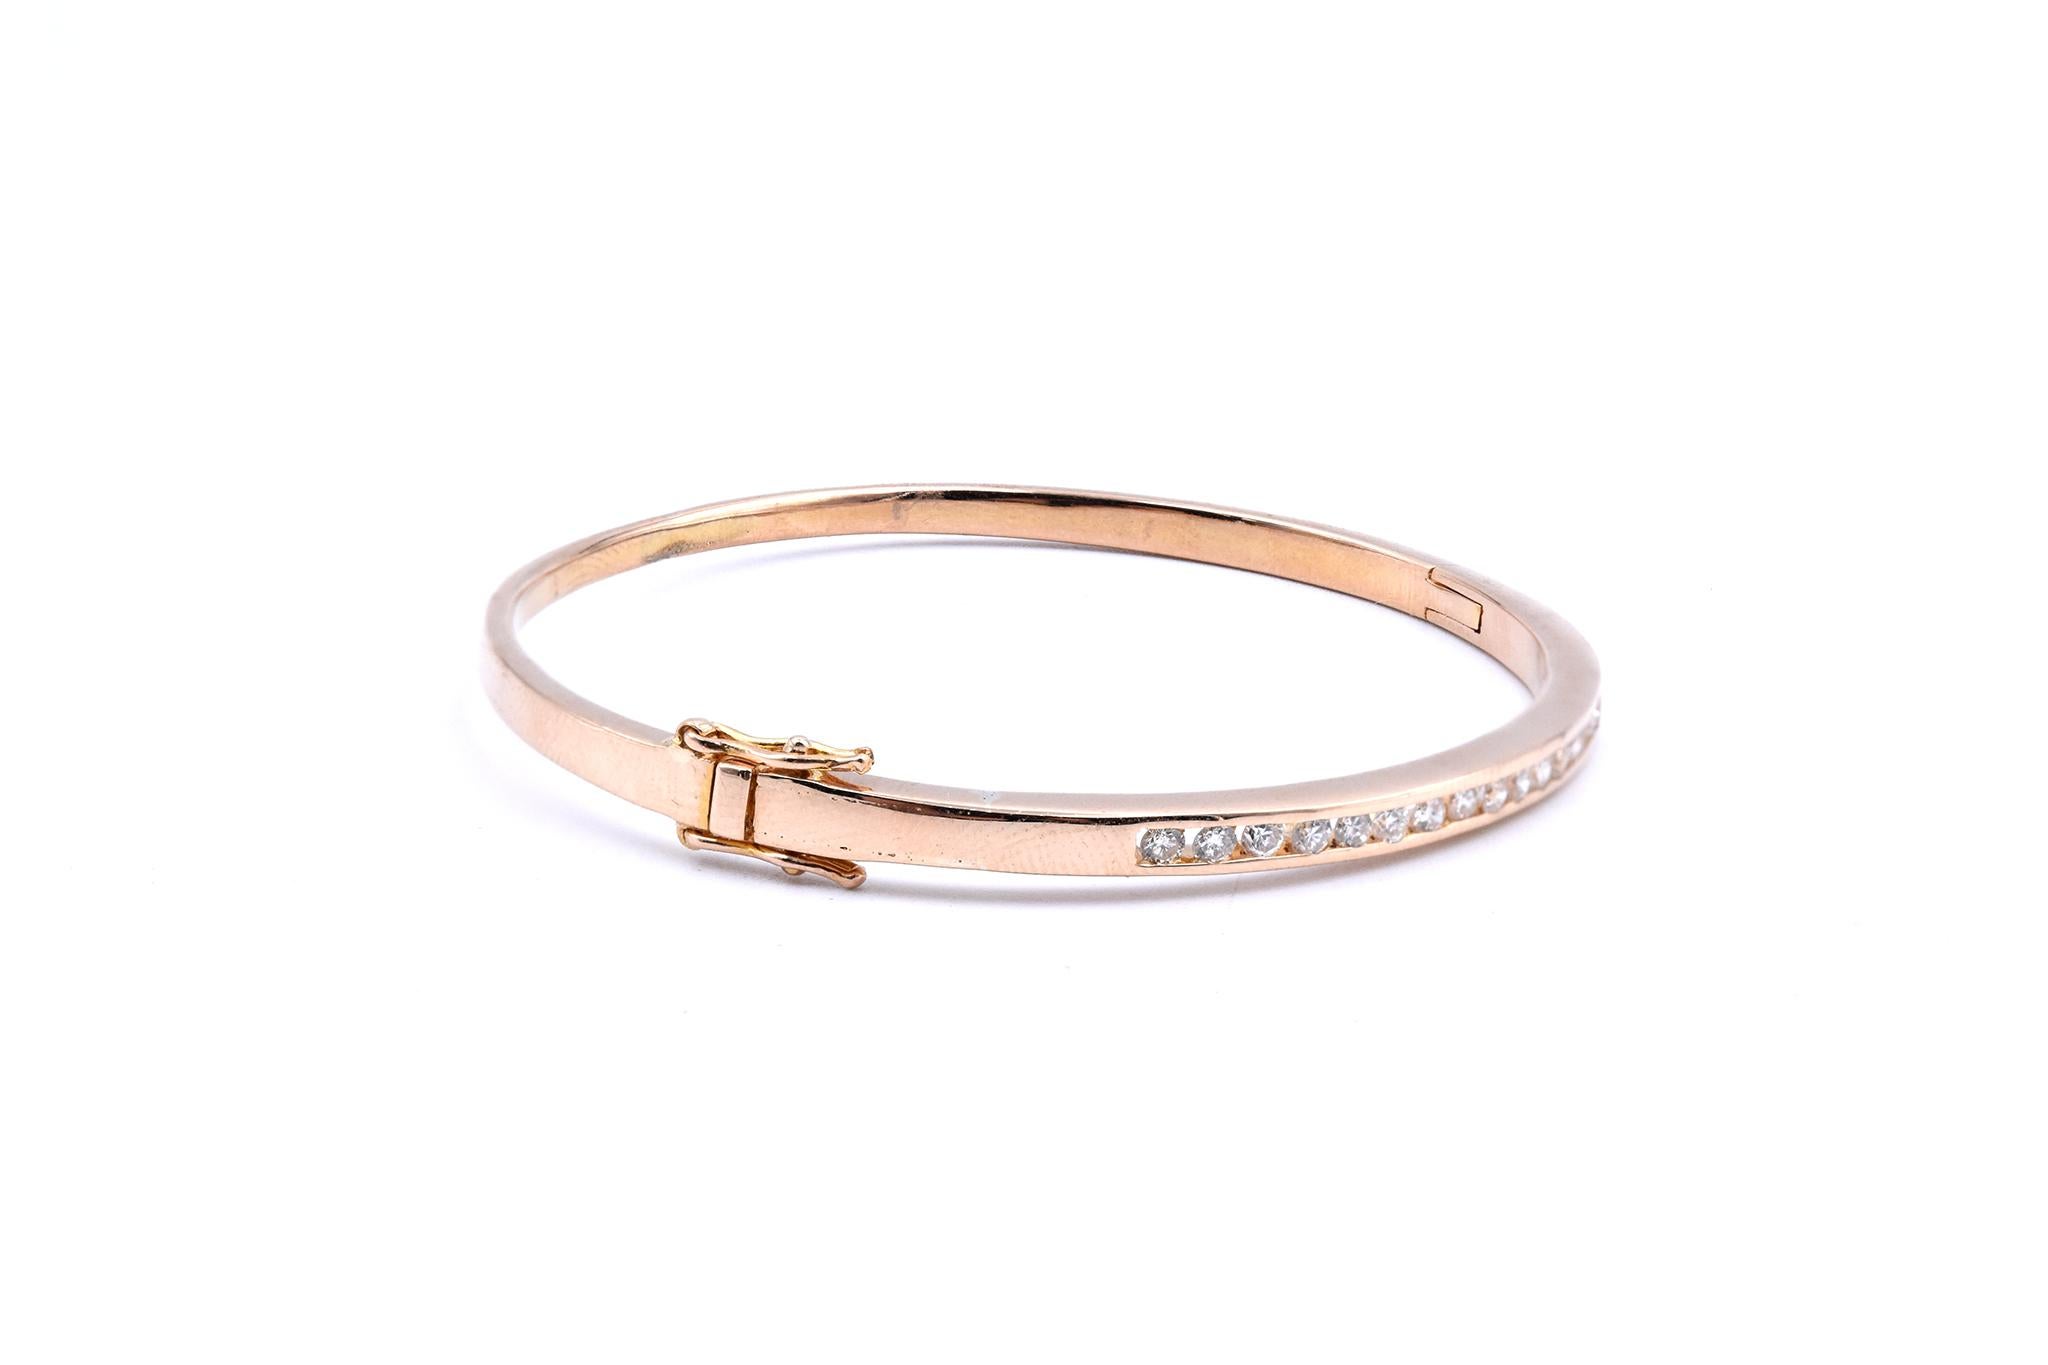 Designer: custom 
Material: 14k yellow gold
Diamonds: 16 round brilliant cuts= .40cttw
Dimensions: the bracelet will fit up to a 6-inch wrist
Weight: 12.48 grams
